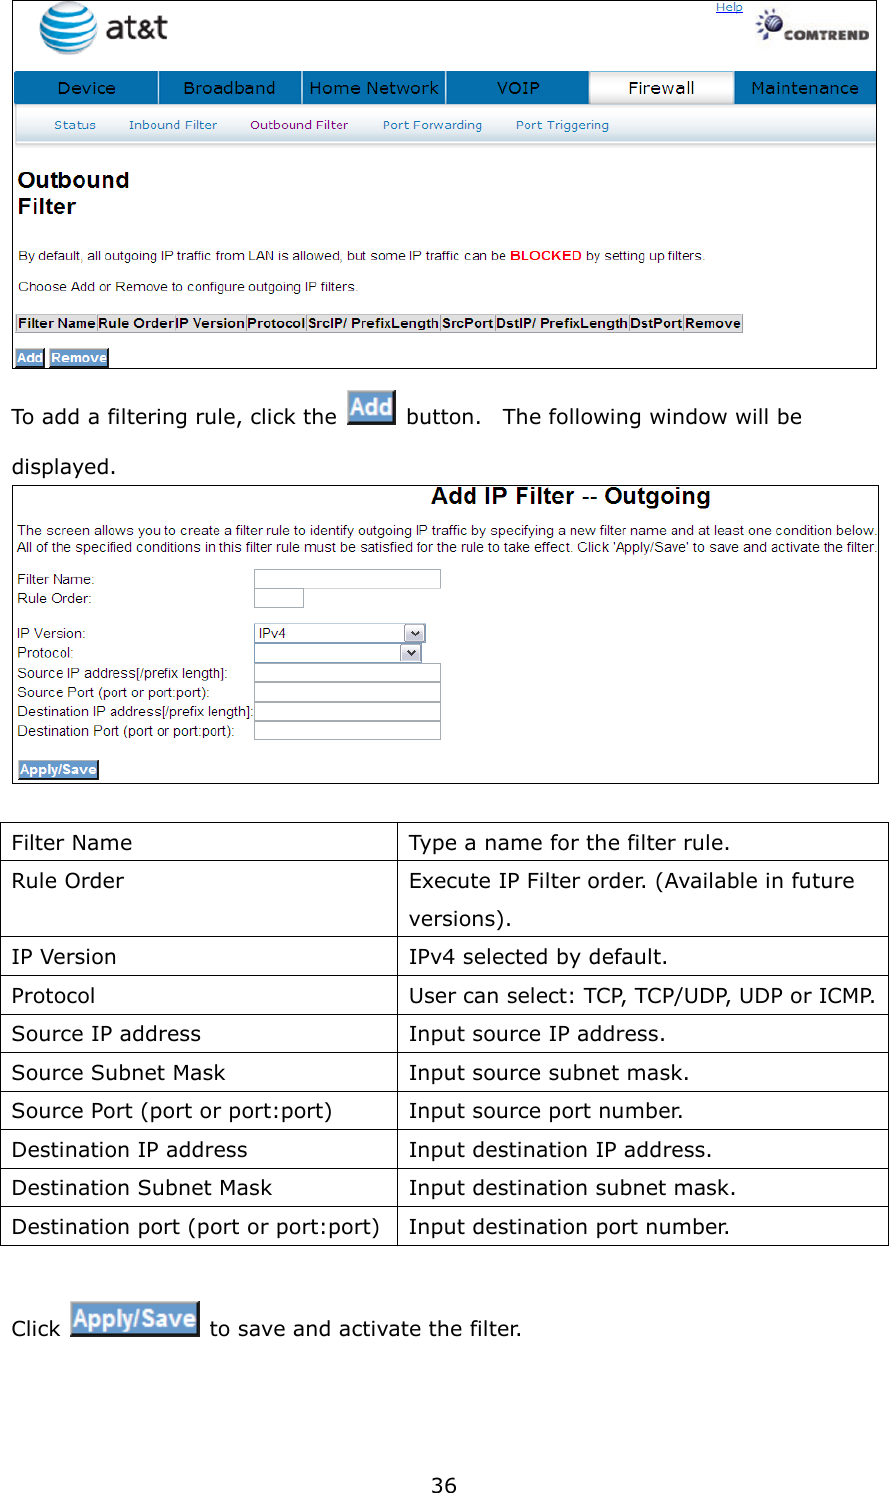 36  To add a filtering rule, click the    button.    The following window will be displayed.   Filter Name  Type a name for the filter rule. Rule Order  Execute IP Filter order. (Available in future versions). IP Version  IPv4 selected by default. Protocol  User can select: TCP, TCP/UDP, UDP or ICMP. Source IP address  Input source IP address. Source Subnet Mask  Input source subnet mask. Source Port (port or port:port)  Input source port number. Destination IP address  Input destination IP address. Destination Subnet Mask  Input destination subnet mask. Destination port (port or port:port) Input destination port number.  Click    to save and activate the filter.  